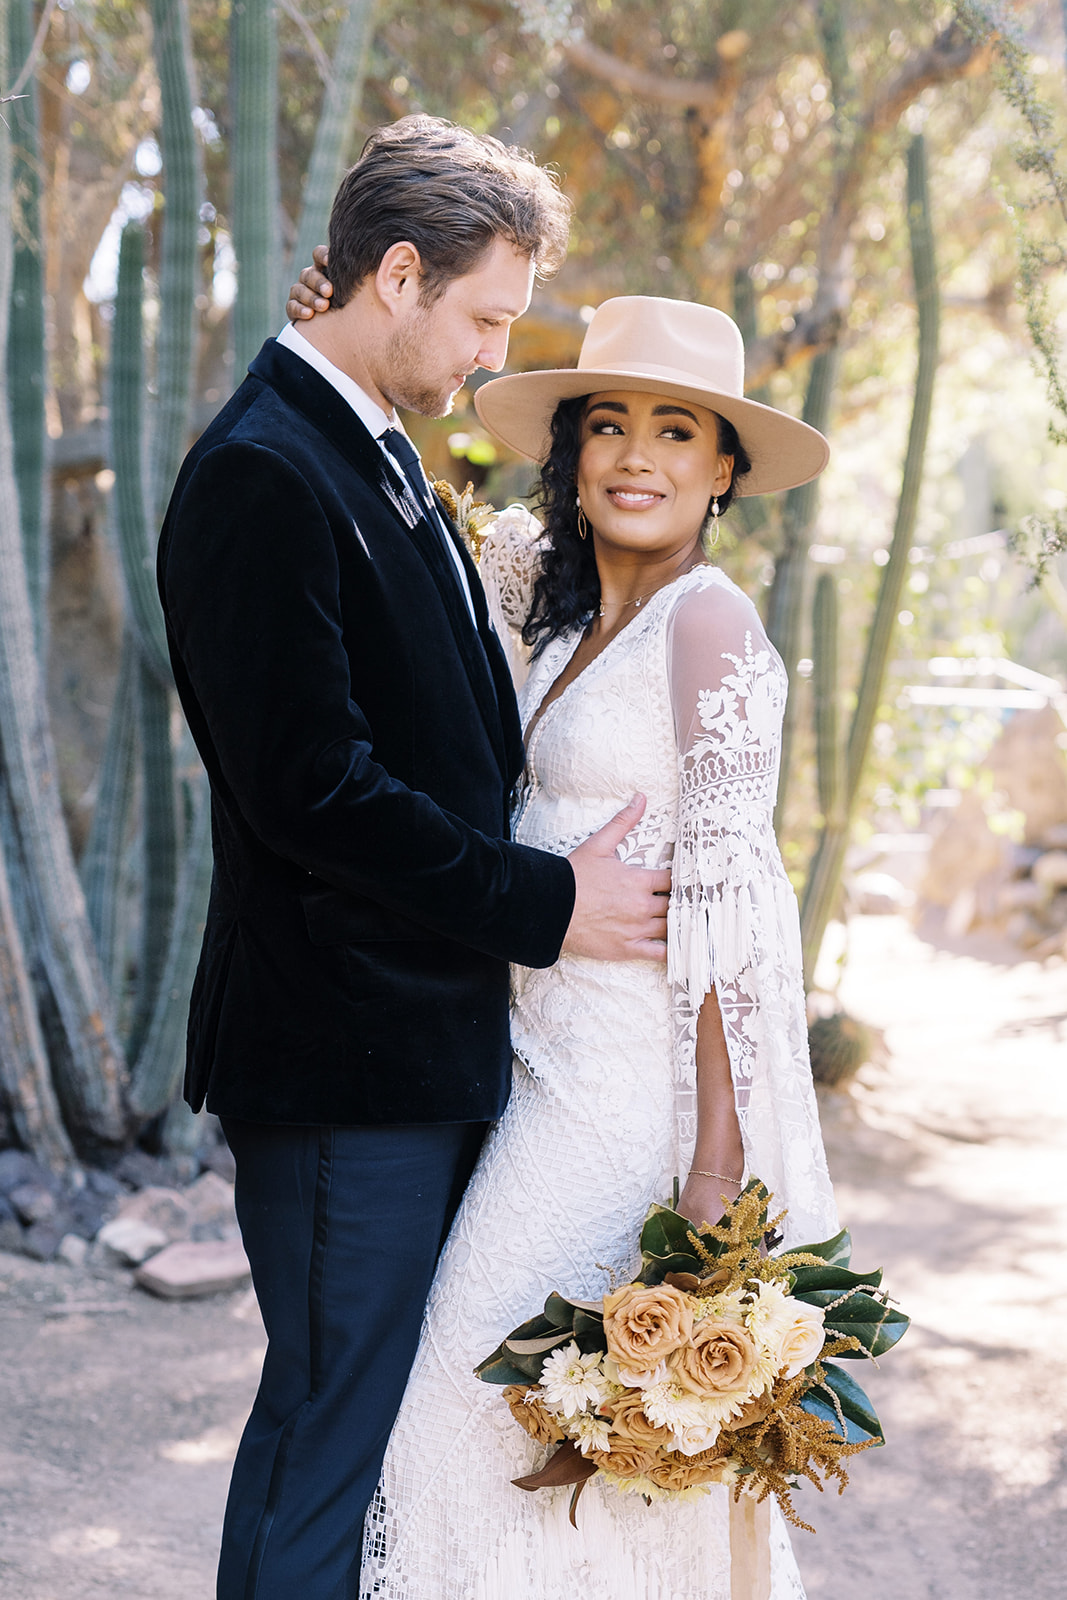 Woman smiling at camera while man looks at her while holding her. They are surrounded by desert cactus and are in a private area. Desert elopement planning